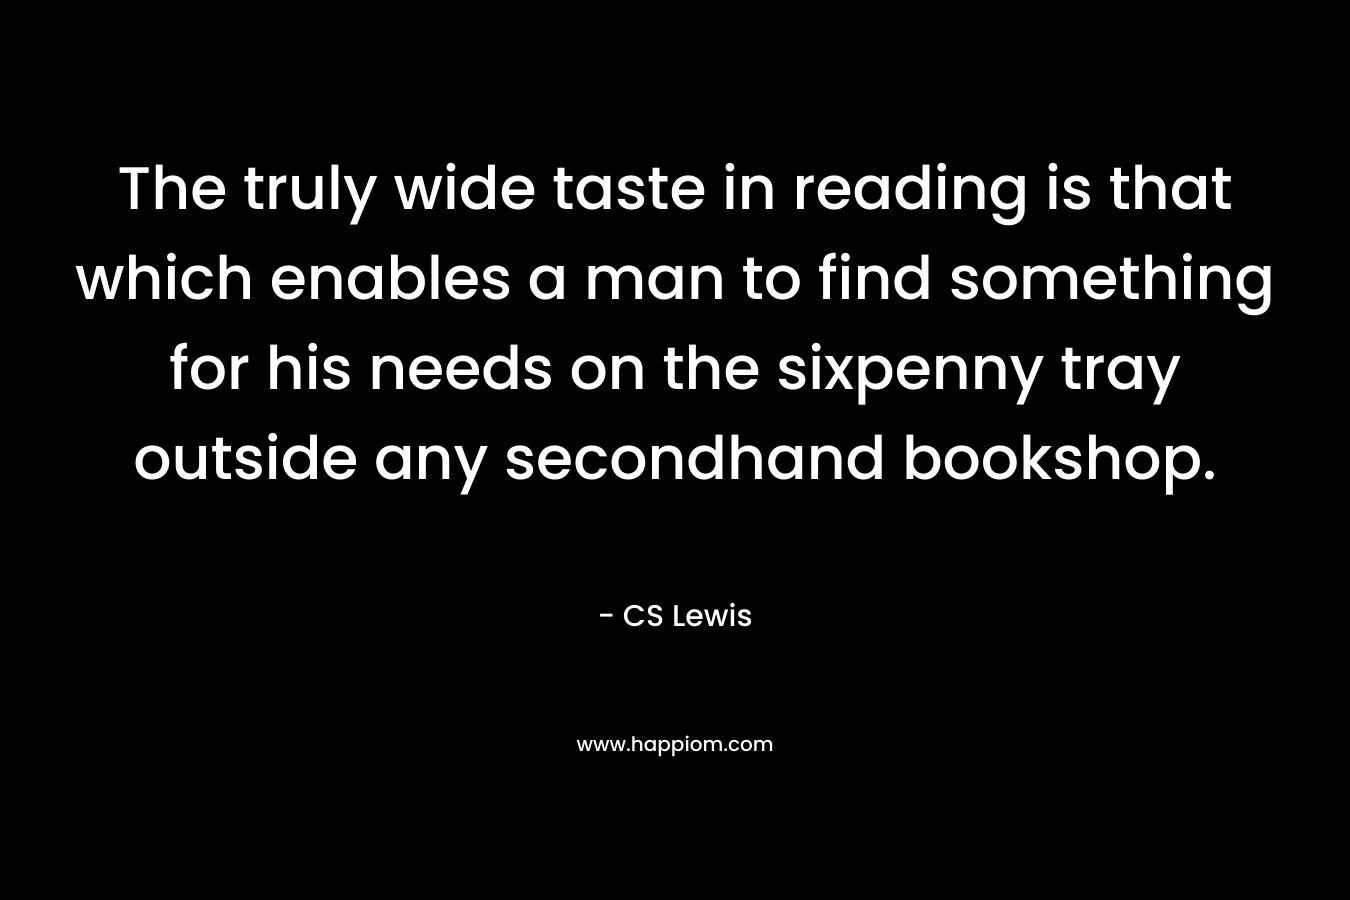 The truly wide taste in reading is that which enables a man to find something for his needs on the sixpenny tray outside any secondhand bookshop. – CS Lewis